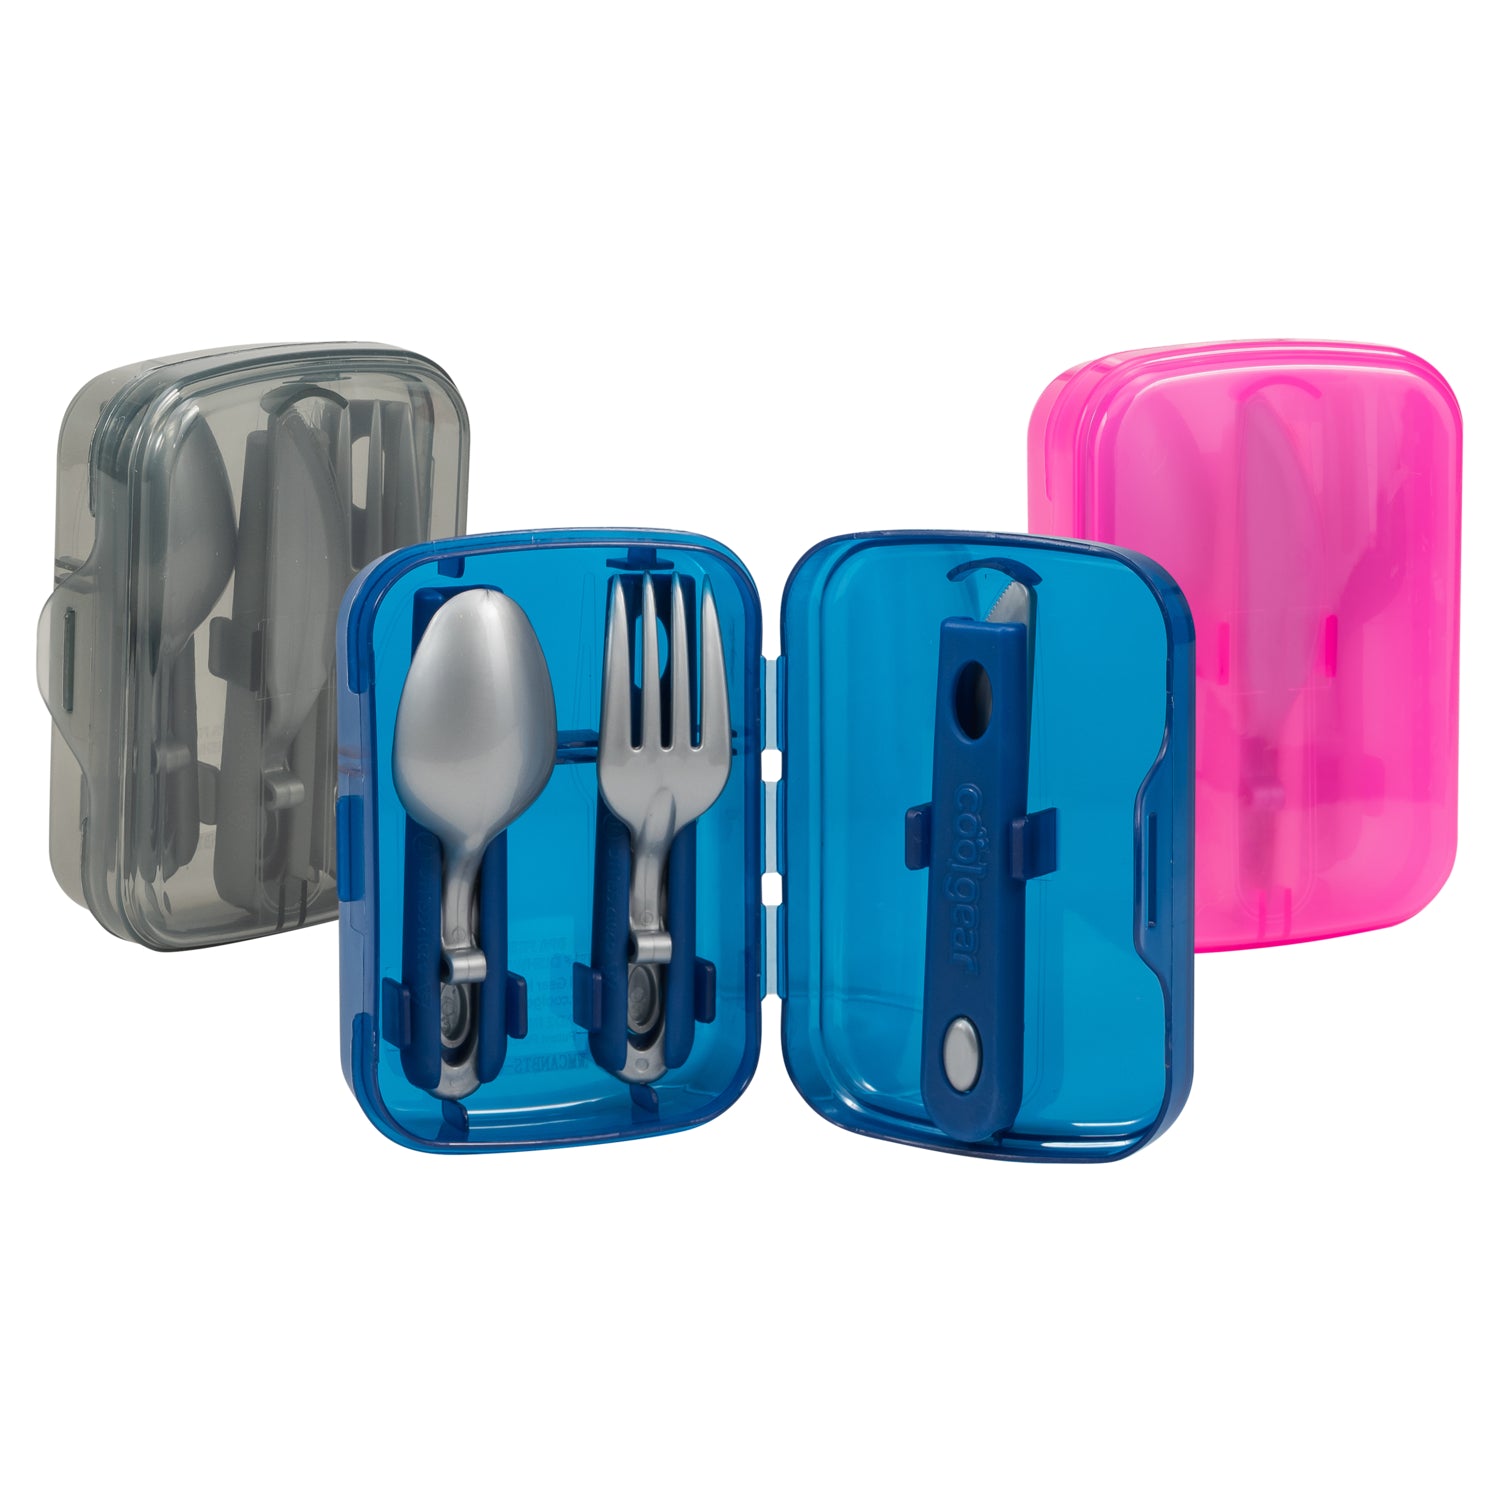 Set　Carry　Case　3-Pack　Cool　Reusable　with　Utensil　Slider　Gear　Travel